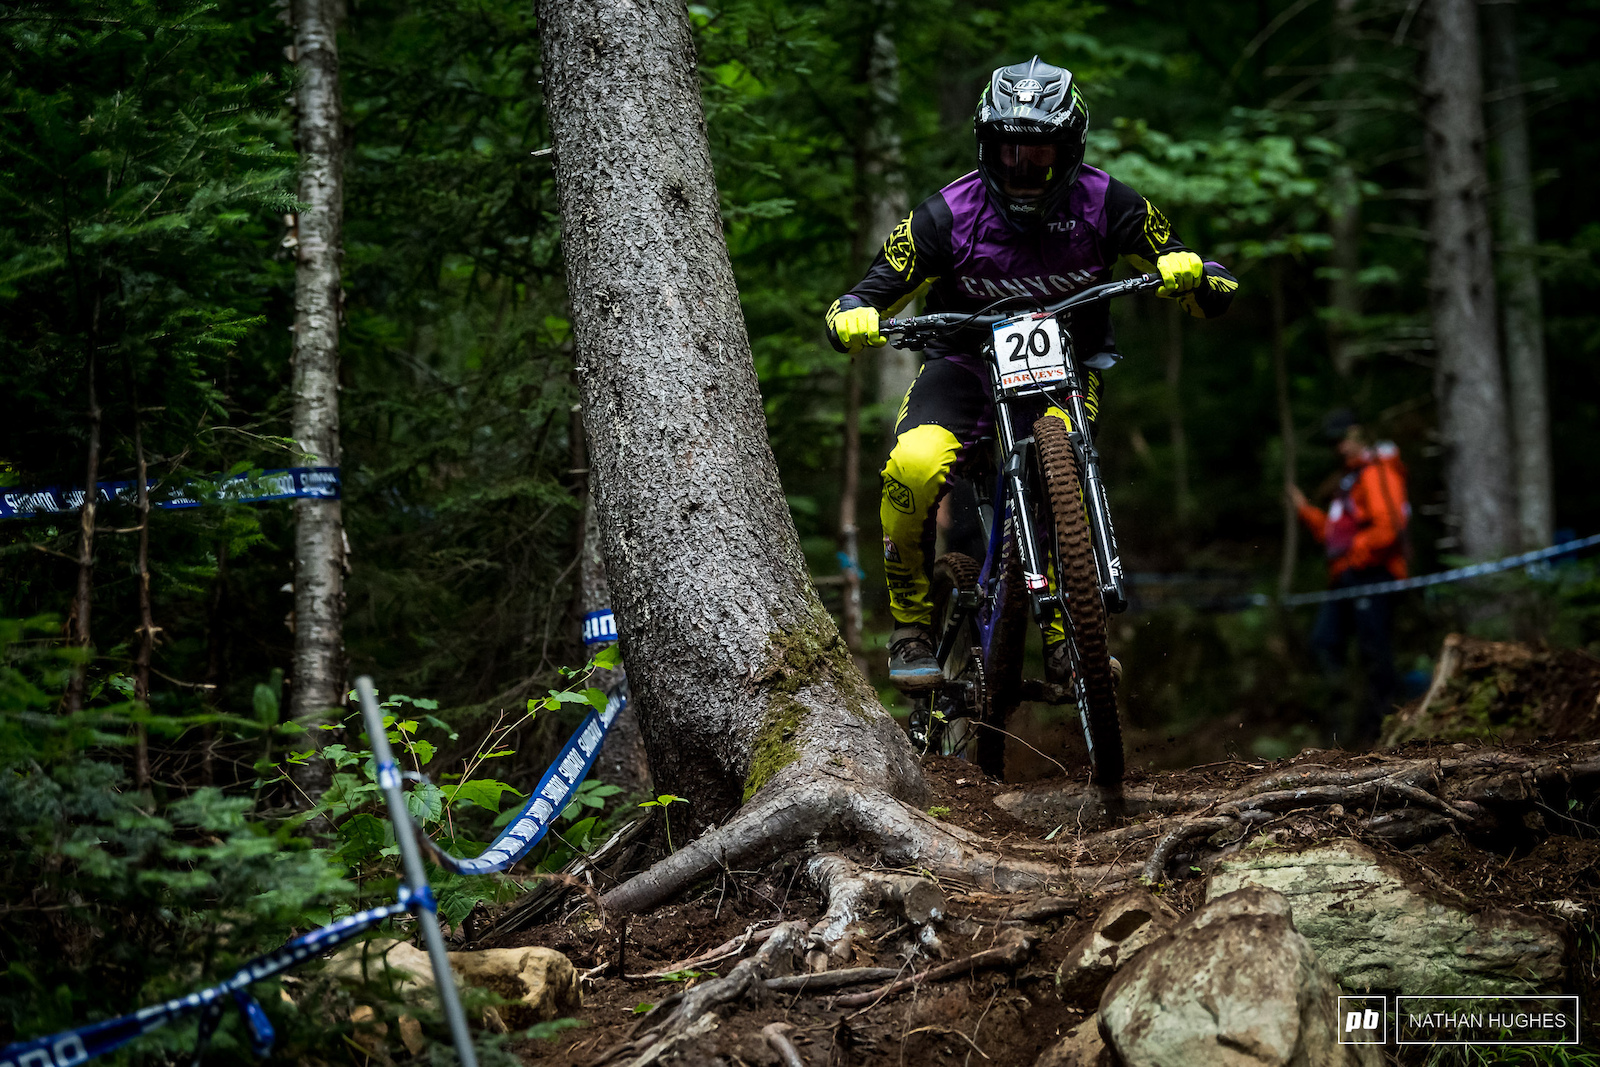 Watch out for a big home loam result from Mark Wallace here at MSA.